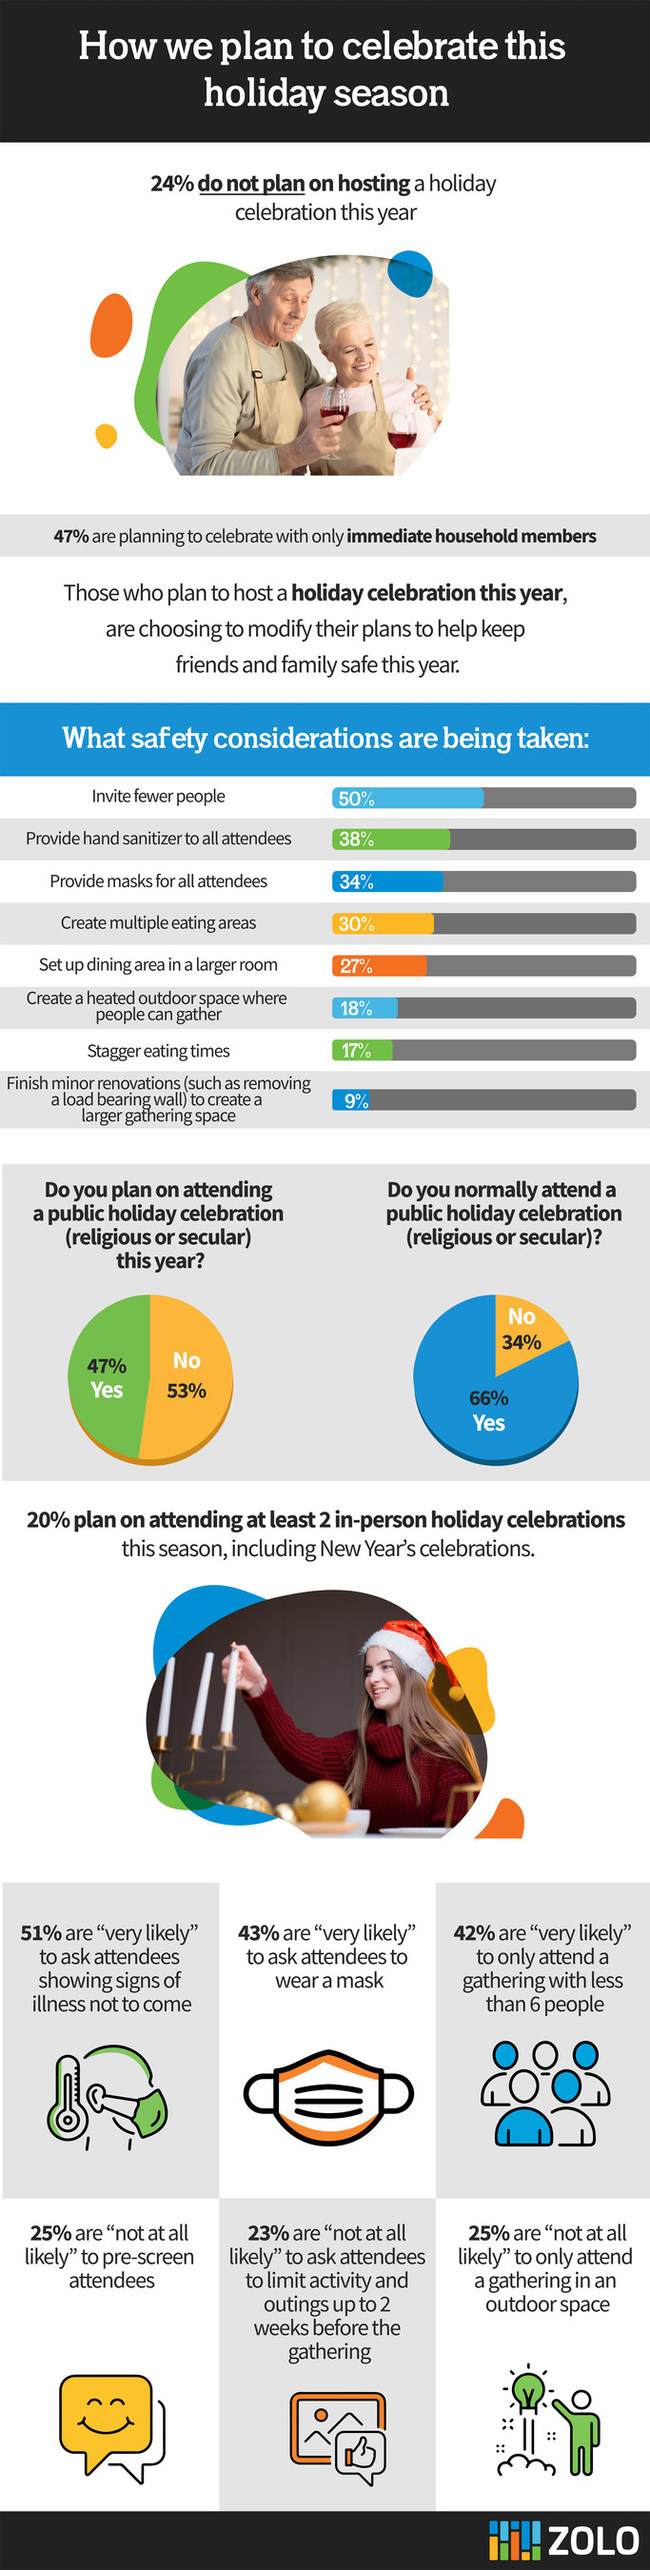 Infographic: New Zolo Homebase survey shows how COVID-19 will impact holidays celebrations this year.